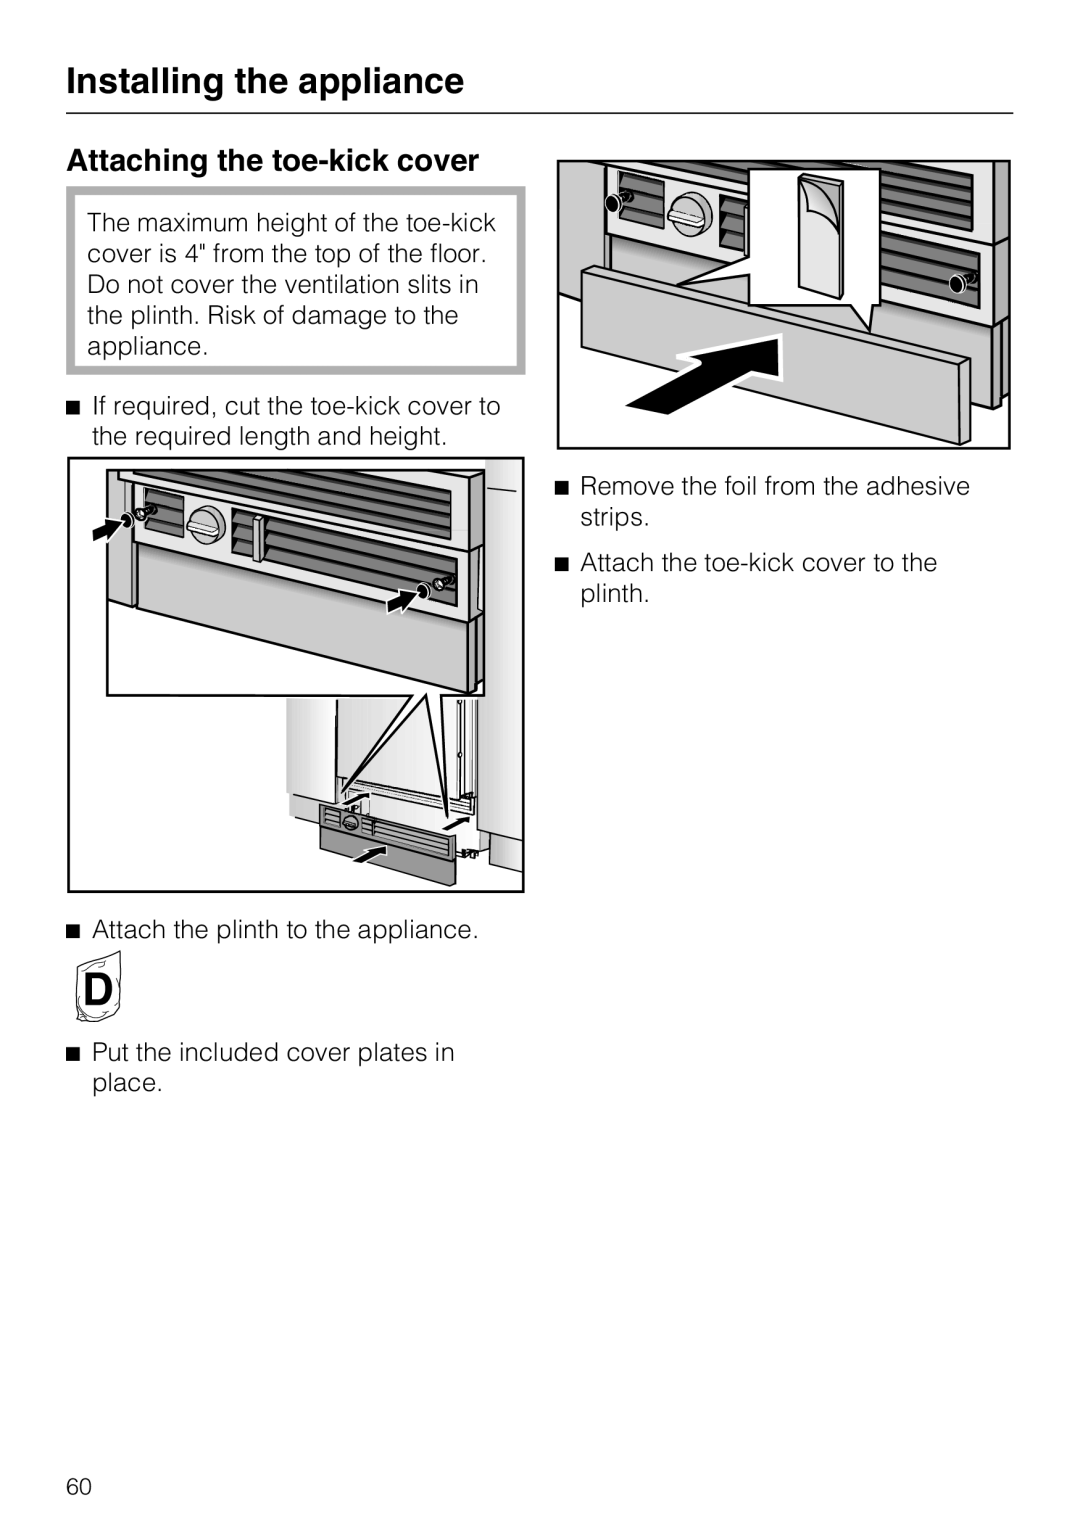 Miele F1801SF, F1911SF, F1811SF, F1901SF installation instructions Attaching the toe-kickcover, Installing the appliance 